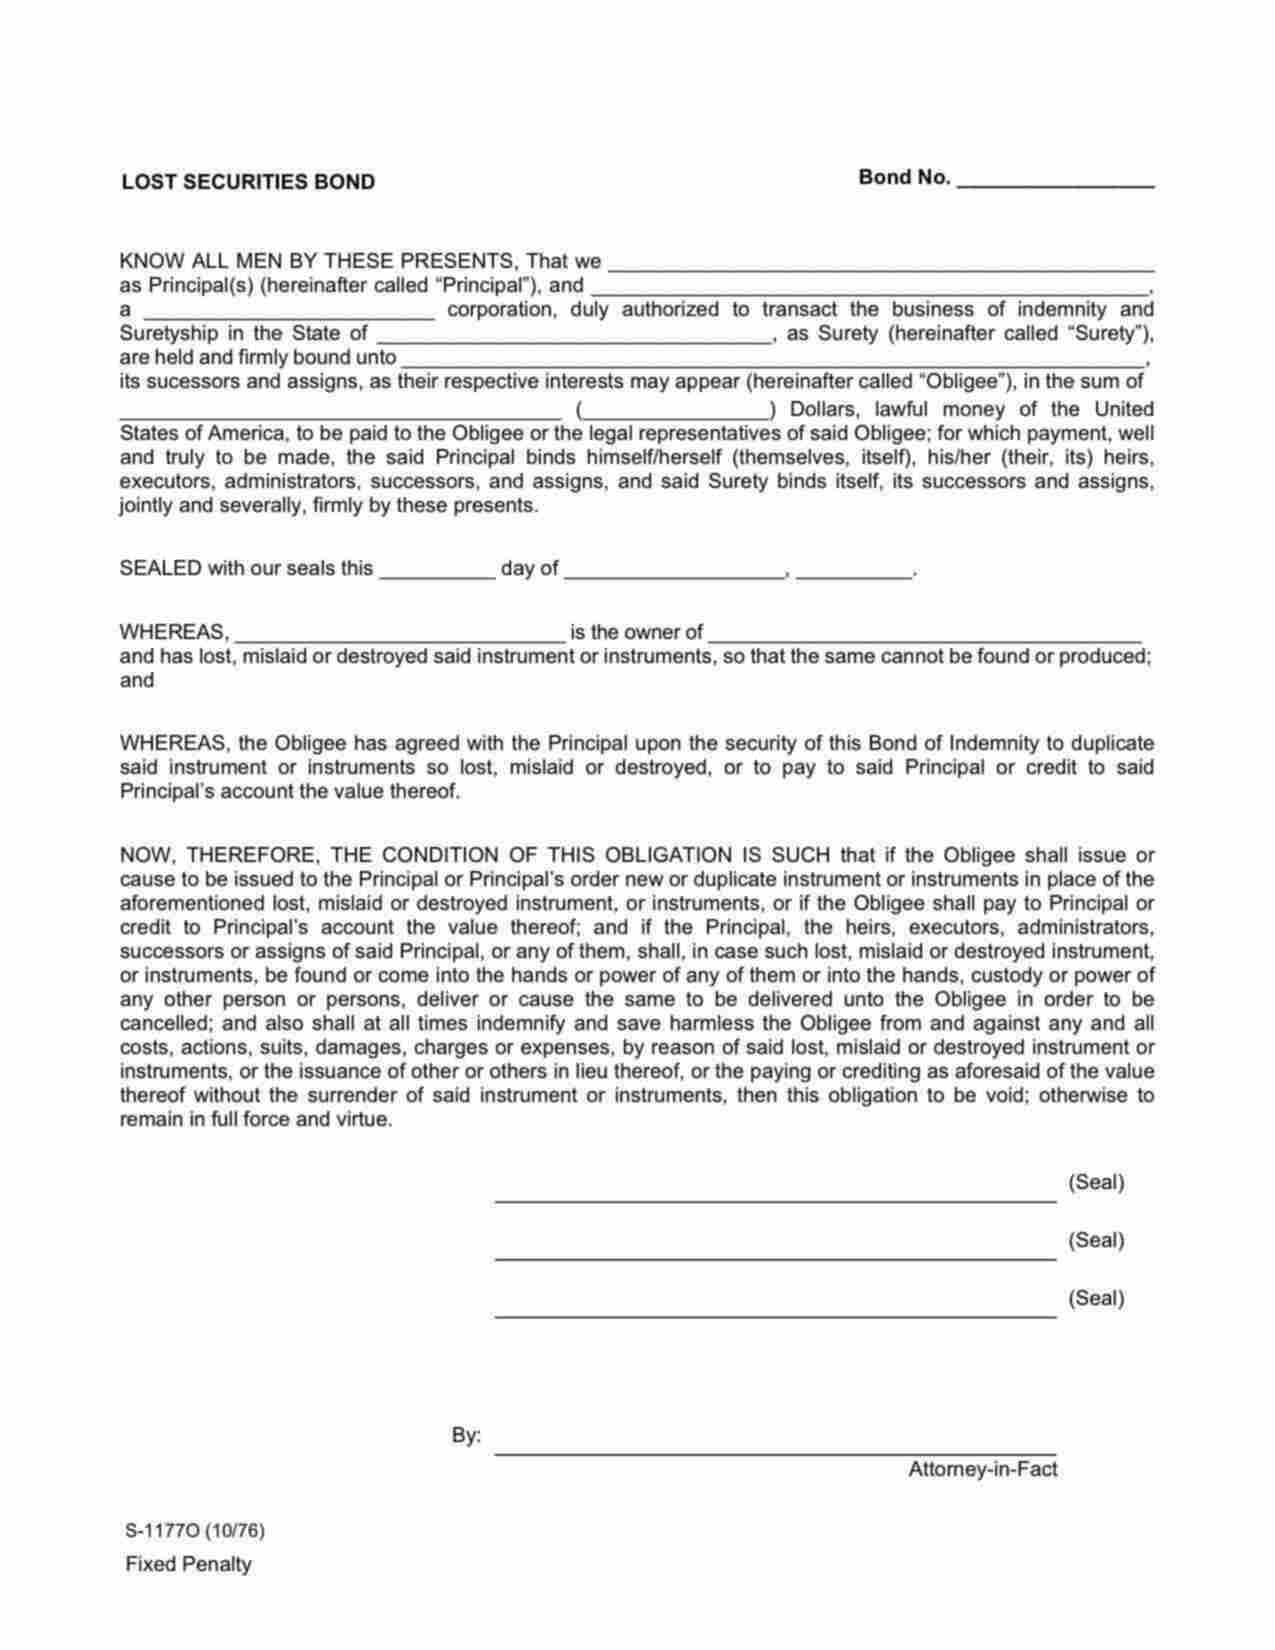 Arkansas Lost Security: Fixed Penalty Bond Form